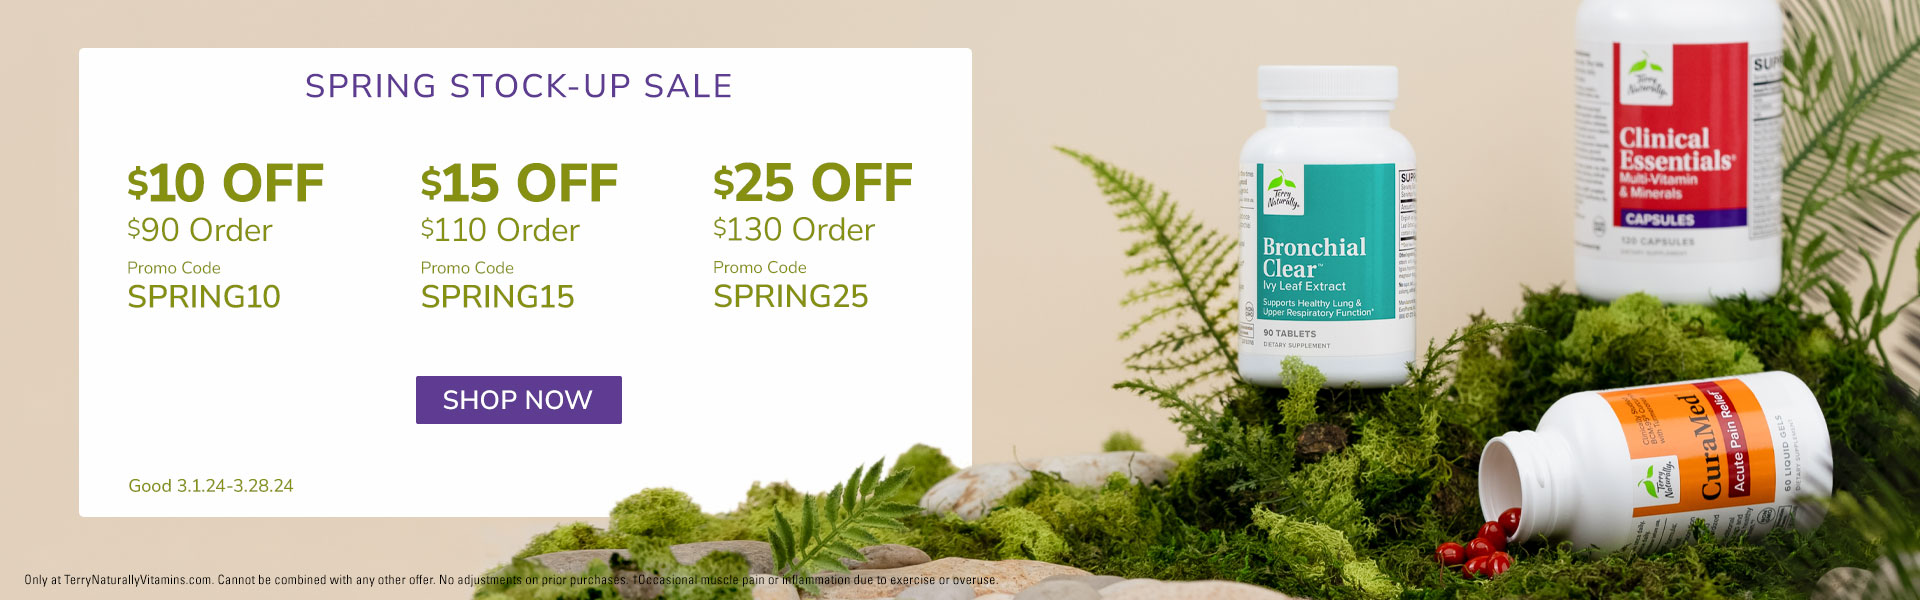 SPRING STOCK-UP SALE • Save up to $25 • Good through 3.28.24